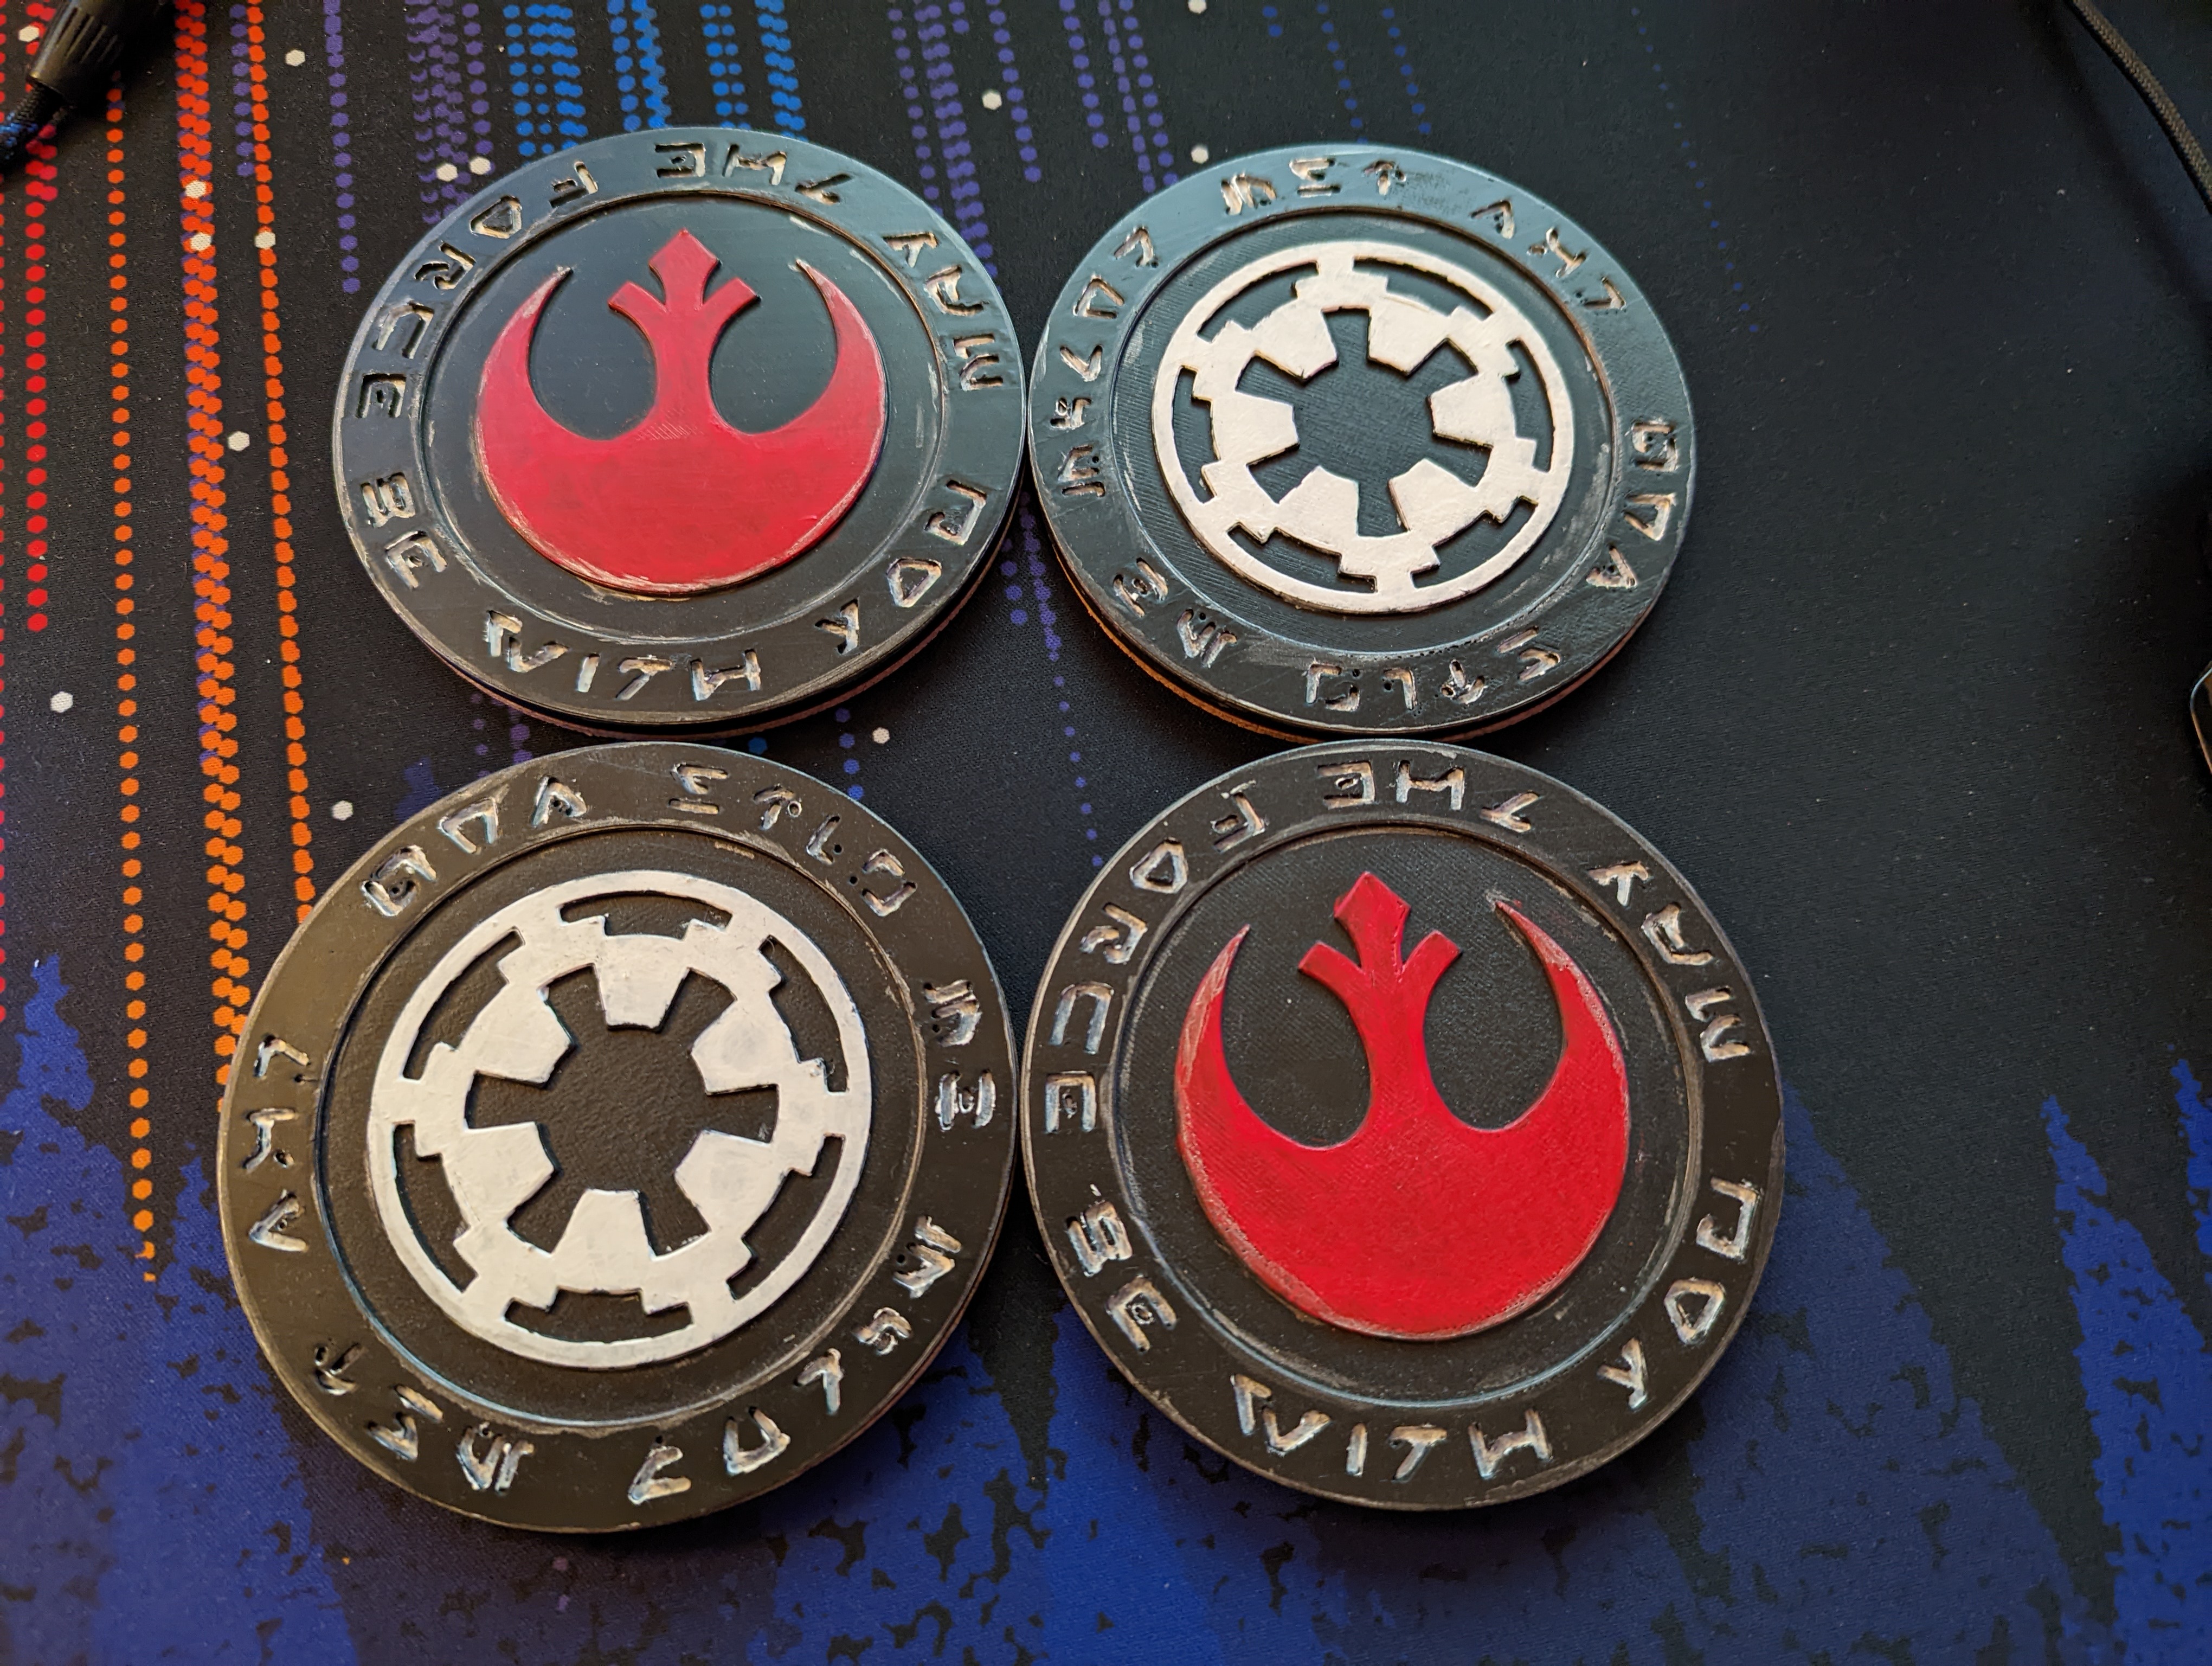 Star Wars Rebellion/Imperial Coasters